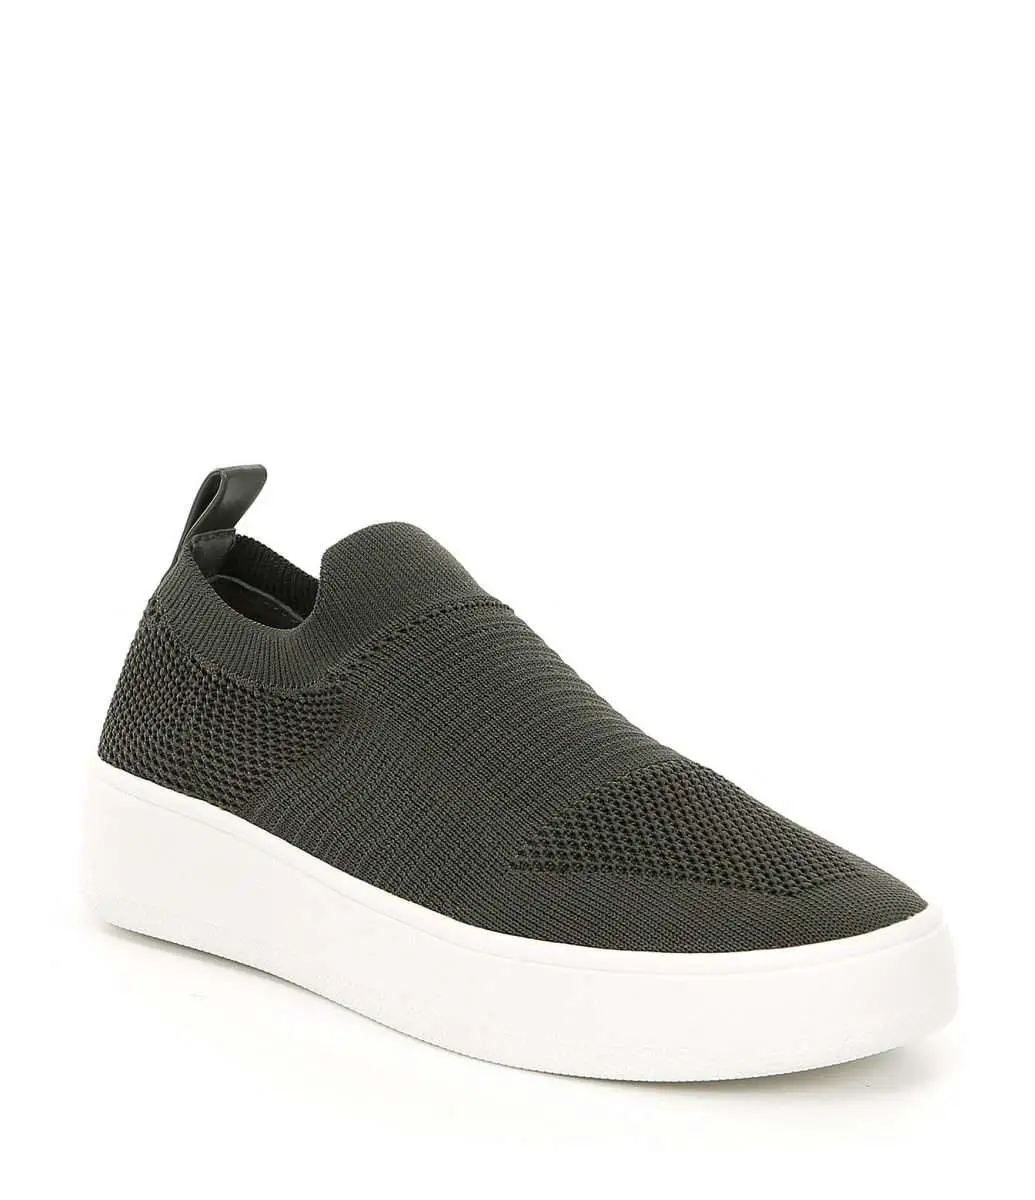 Steve Madden Beale Stretch Knit Sneakers in Olive (Green)